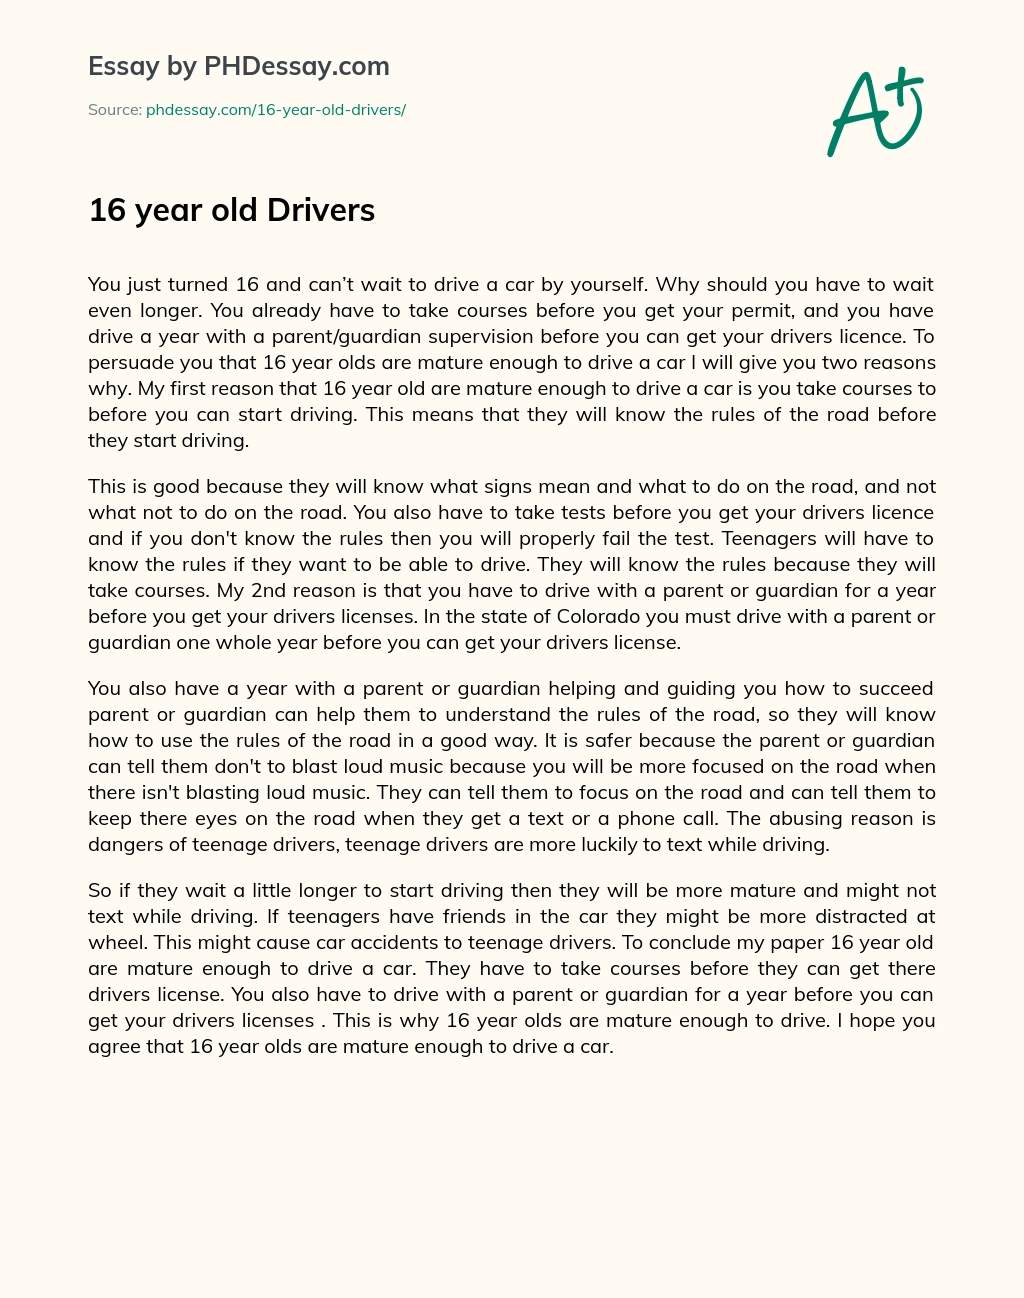 16 year old Drivers essay